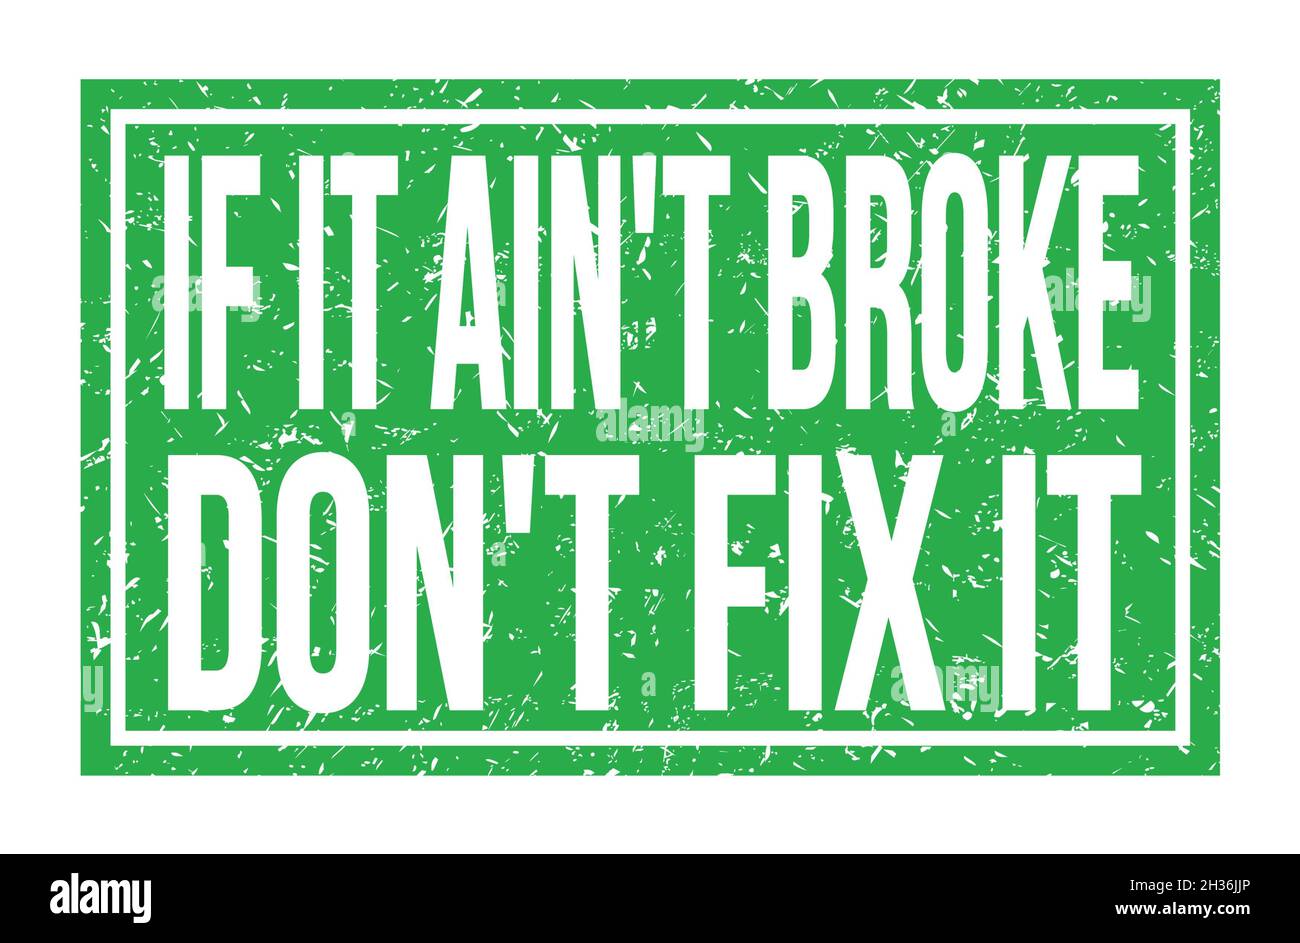 IF IT AIN'T BROKE DON'T FIX IT, words written on green rectangle stamp sign  Stock Photo - Alamy